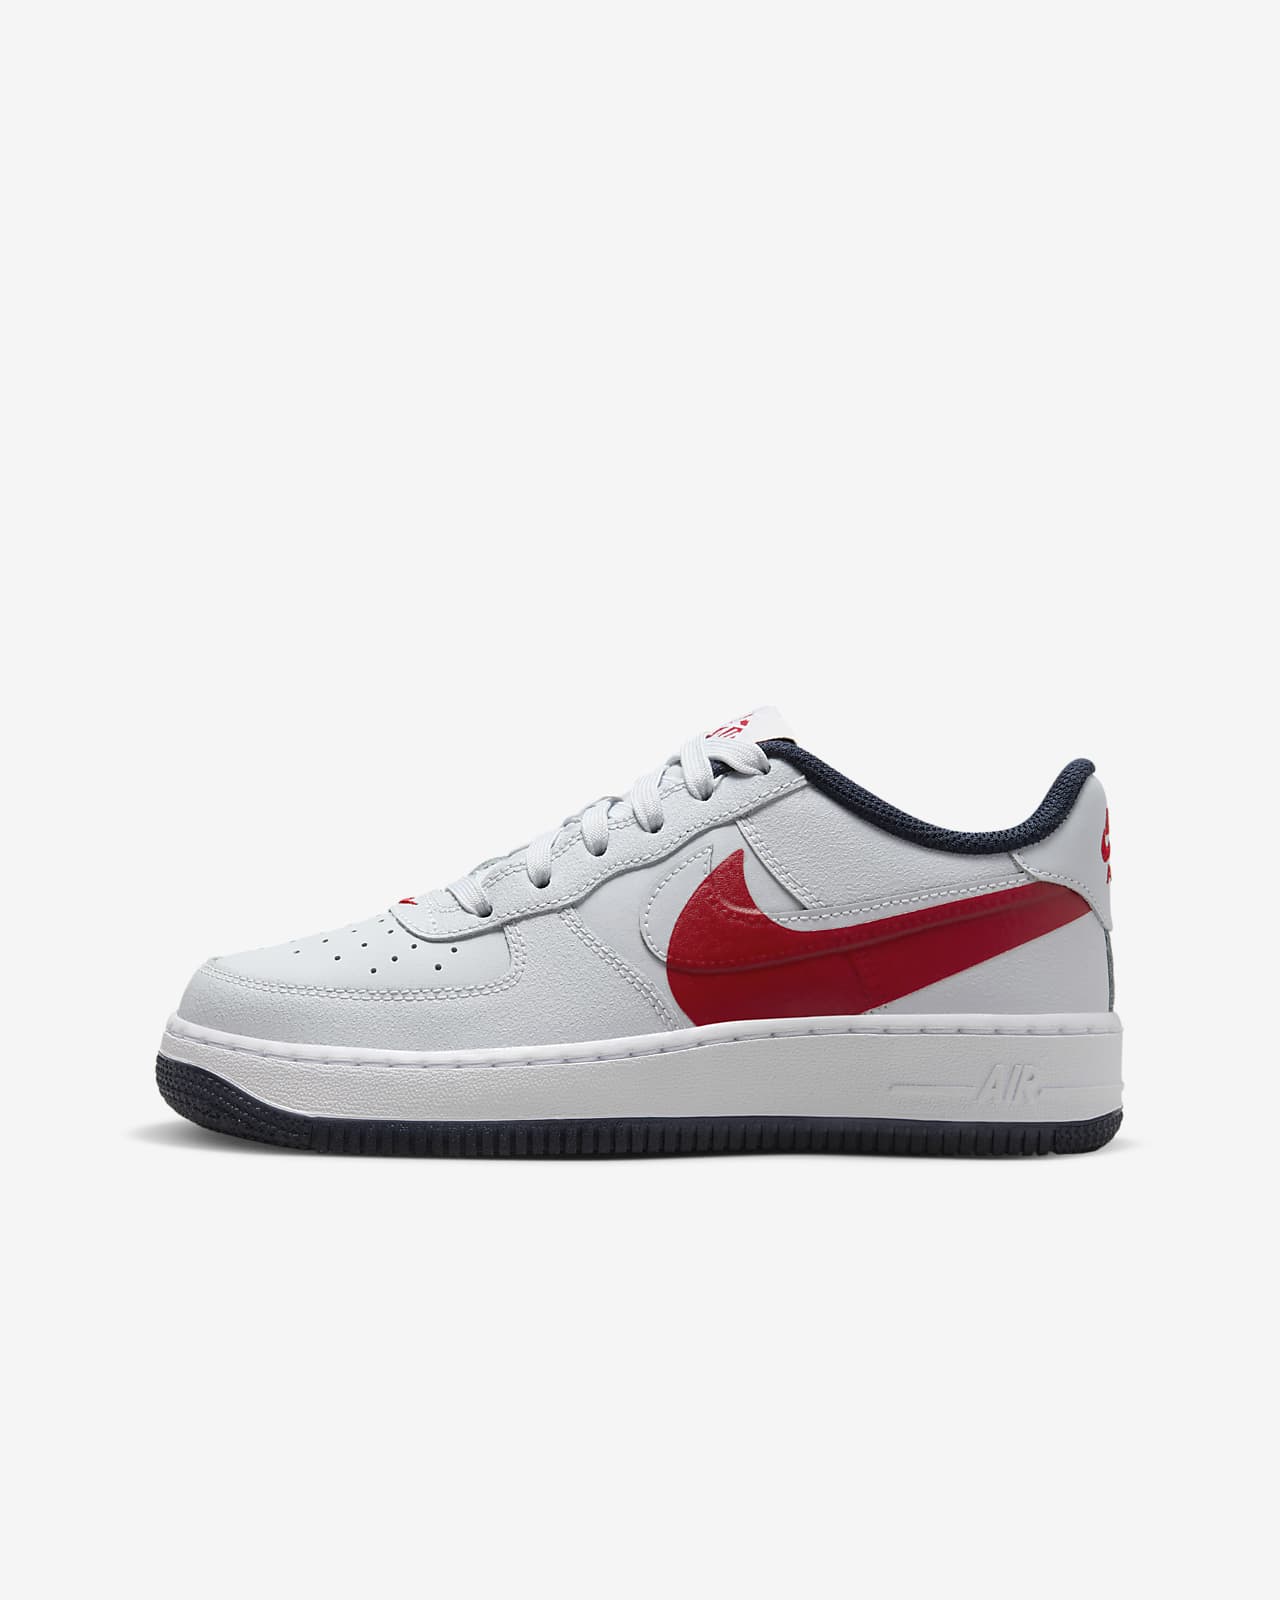 Chaussures Nike Air Force 1 LV8 4 pour ado